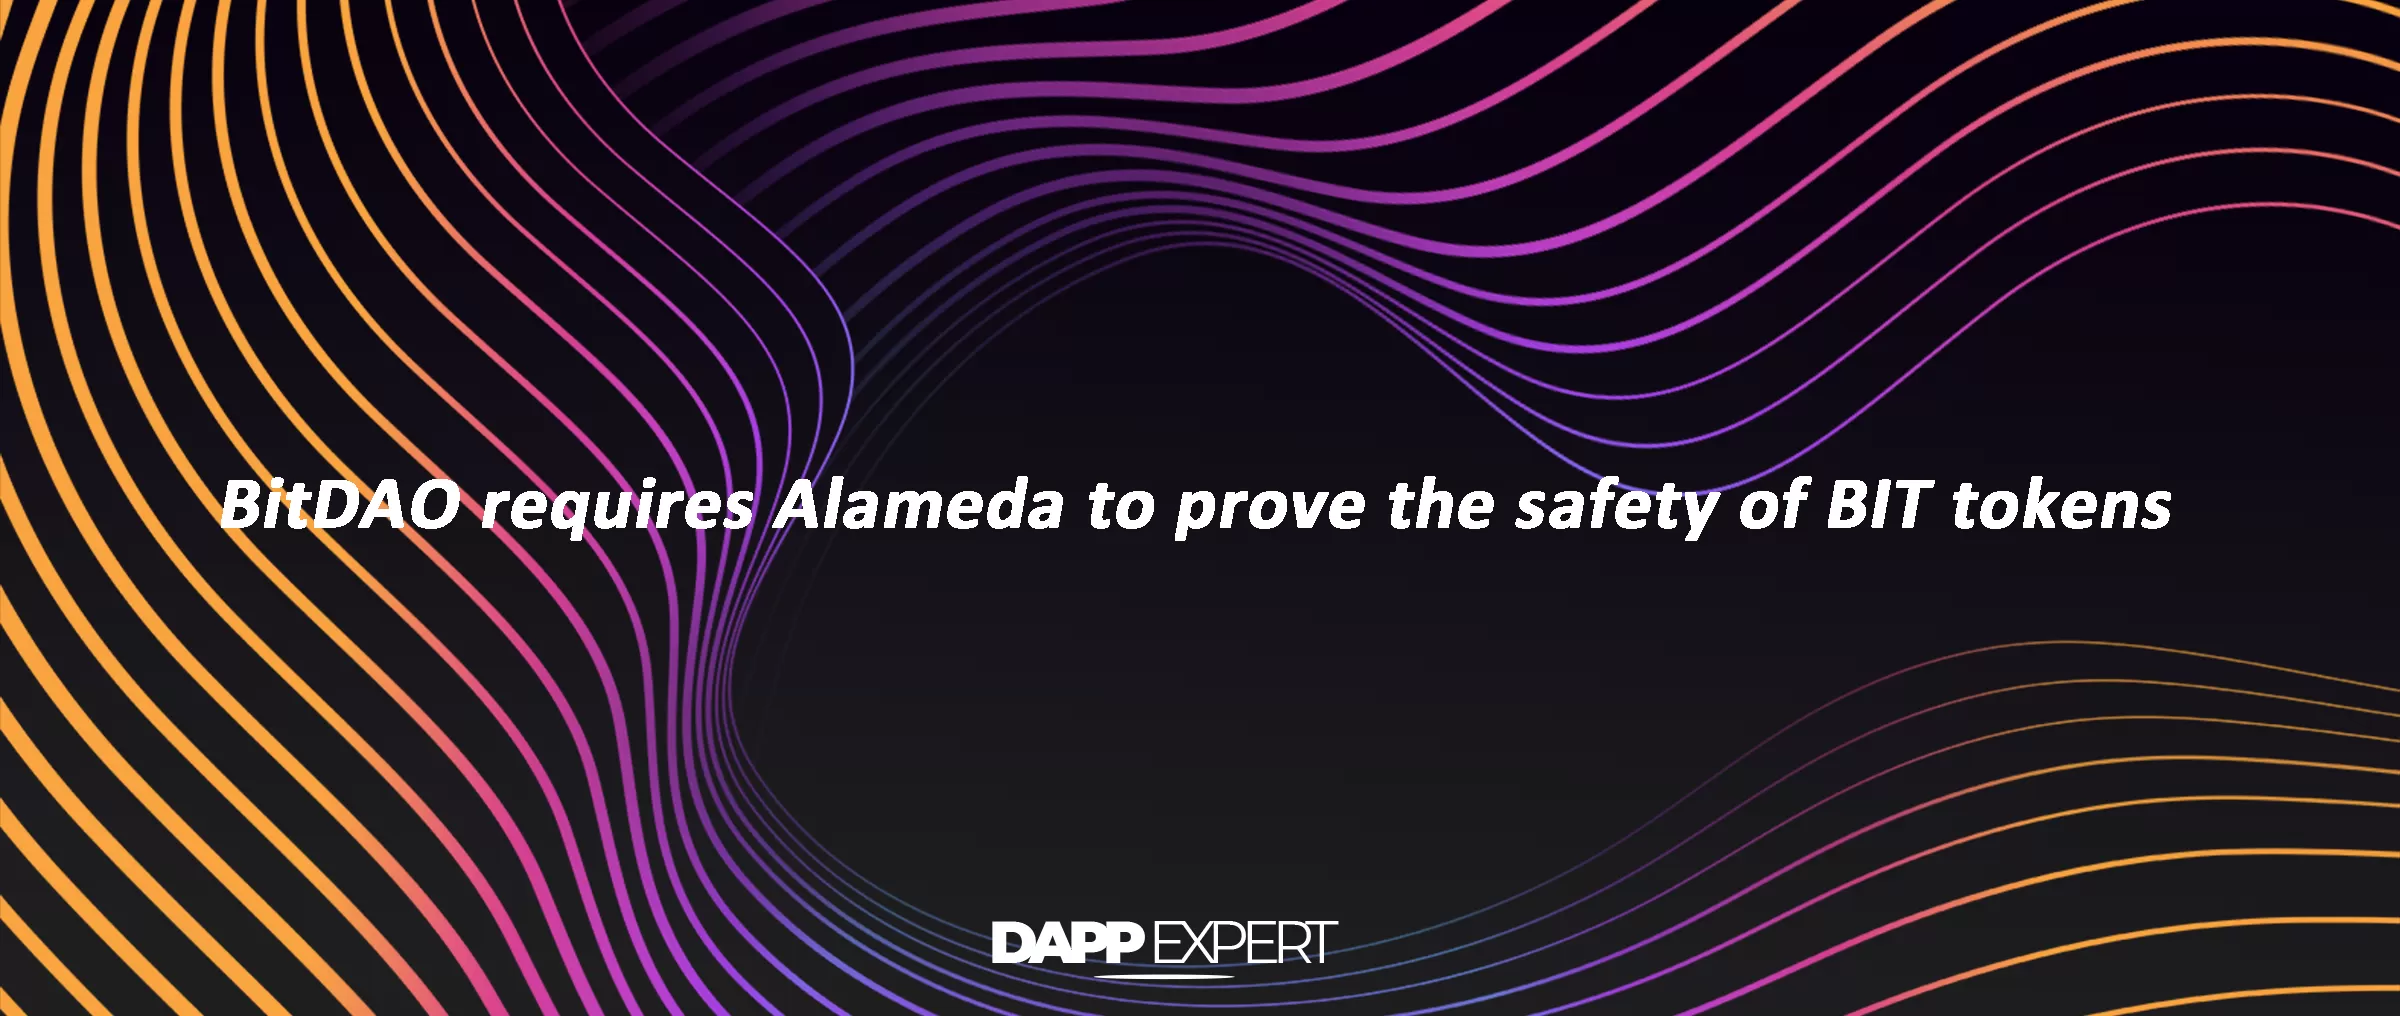 BitDAO requires Alameda to prove the safety of BIT tokens